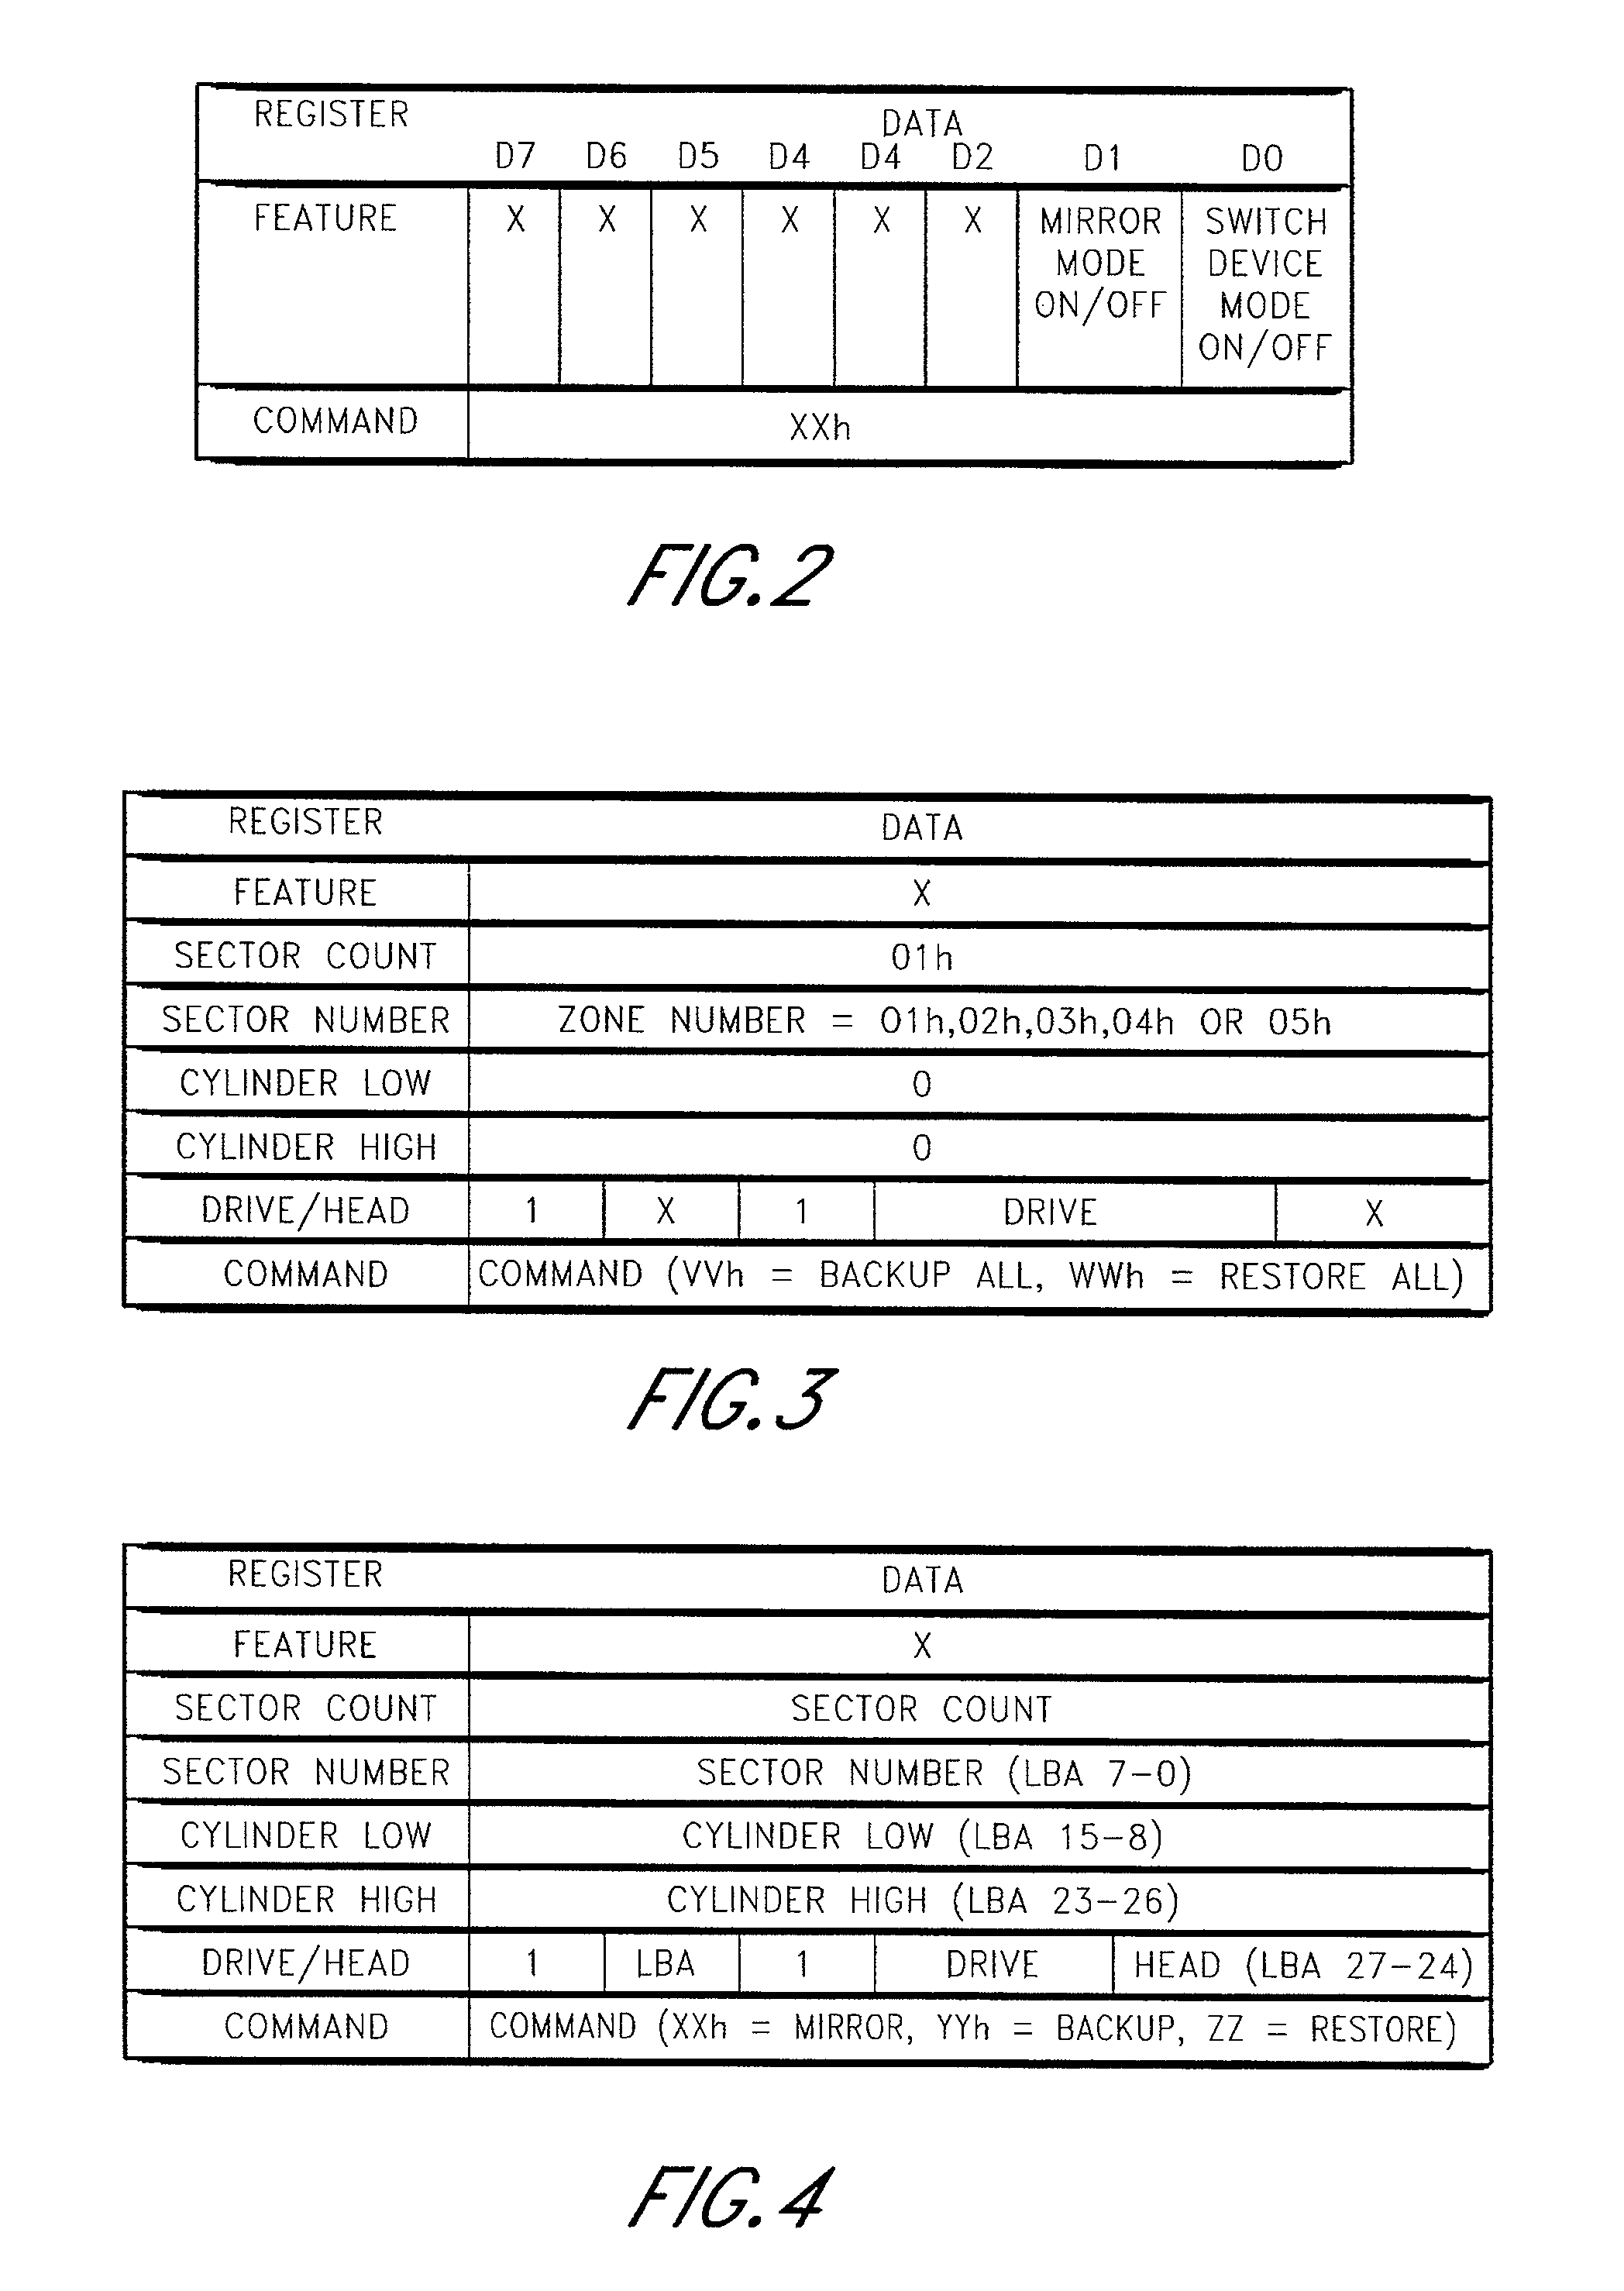 Storage subsystem with multiple non-volatile memory arrays to protect against data losses